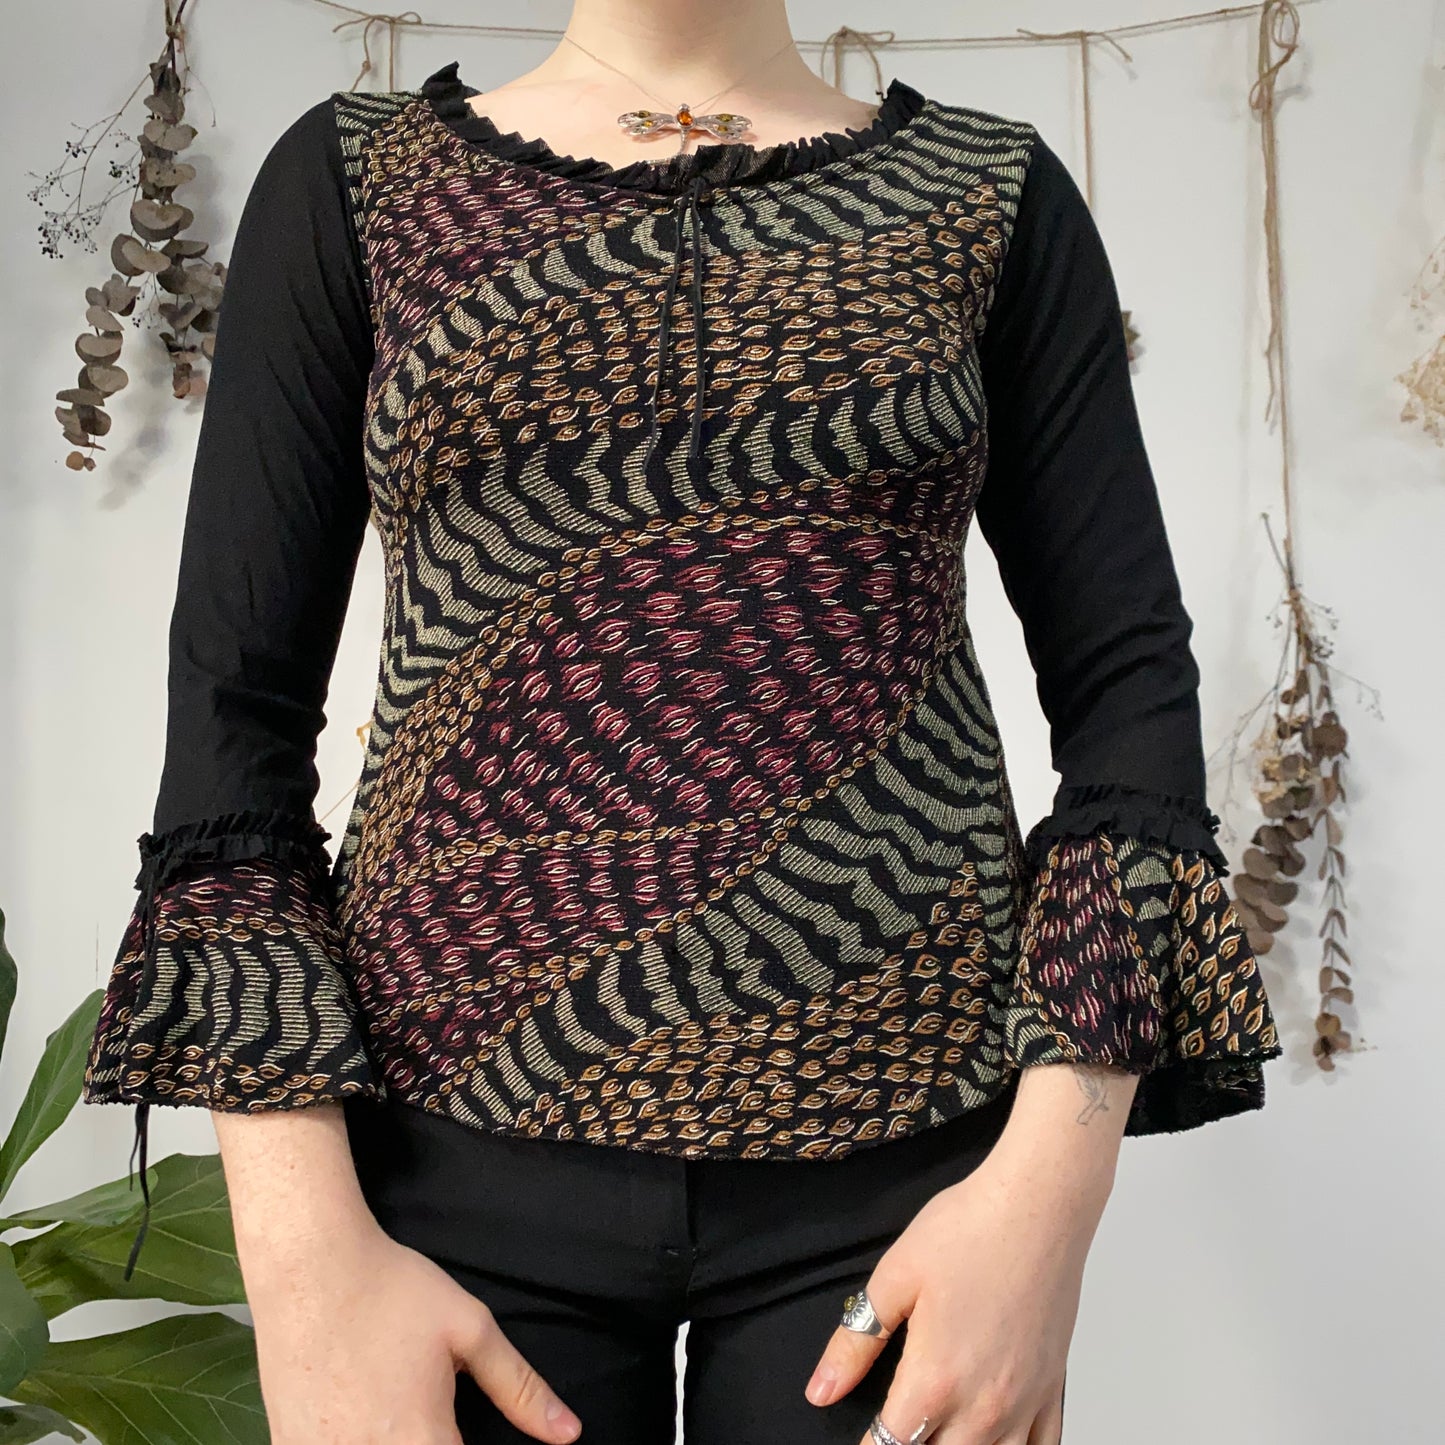 Mesh top - size M